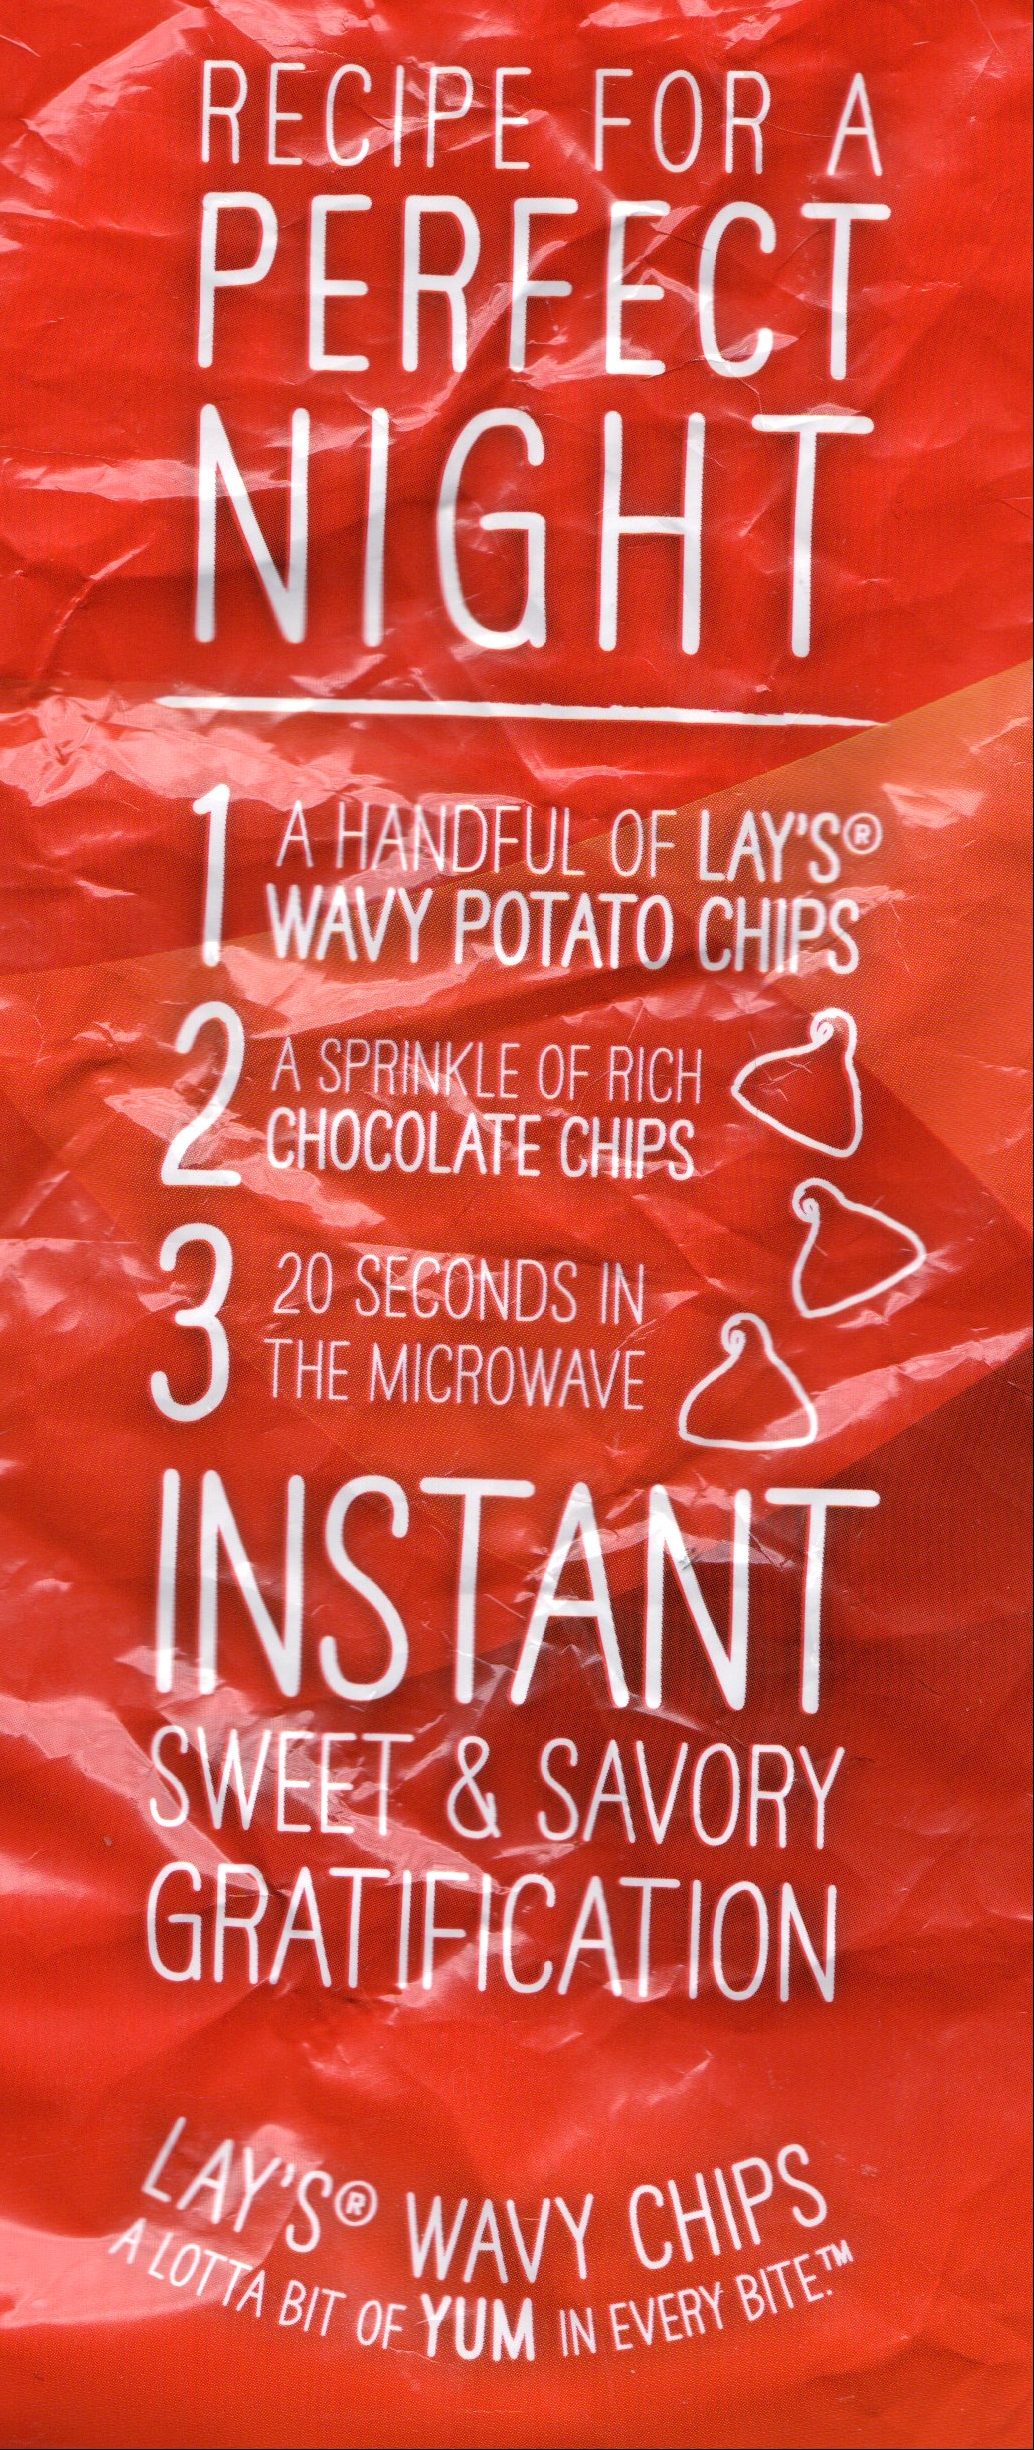 Lays potato chips and chocolate: Not a perfect evening, but spell components to open a portal to Hell